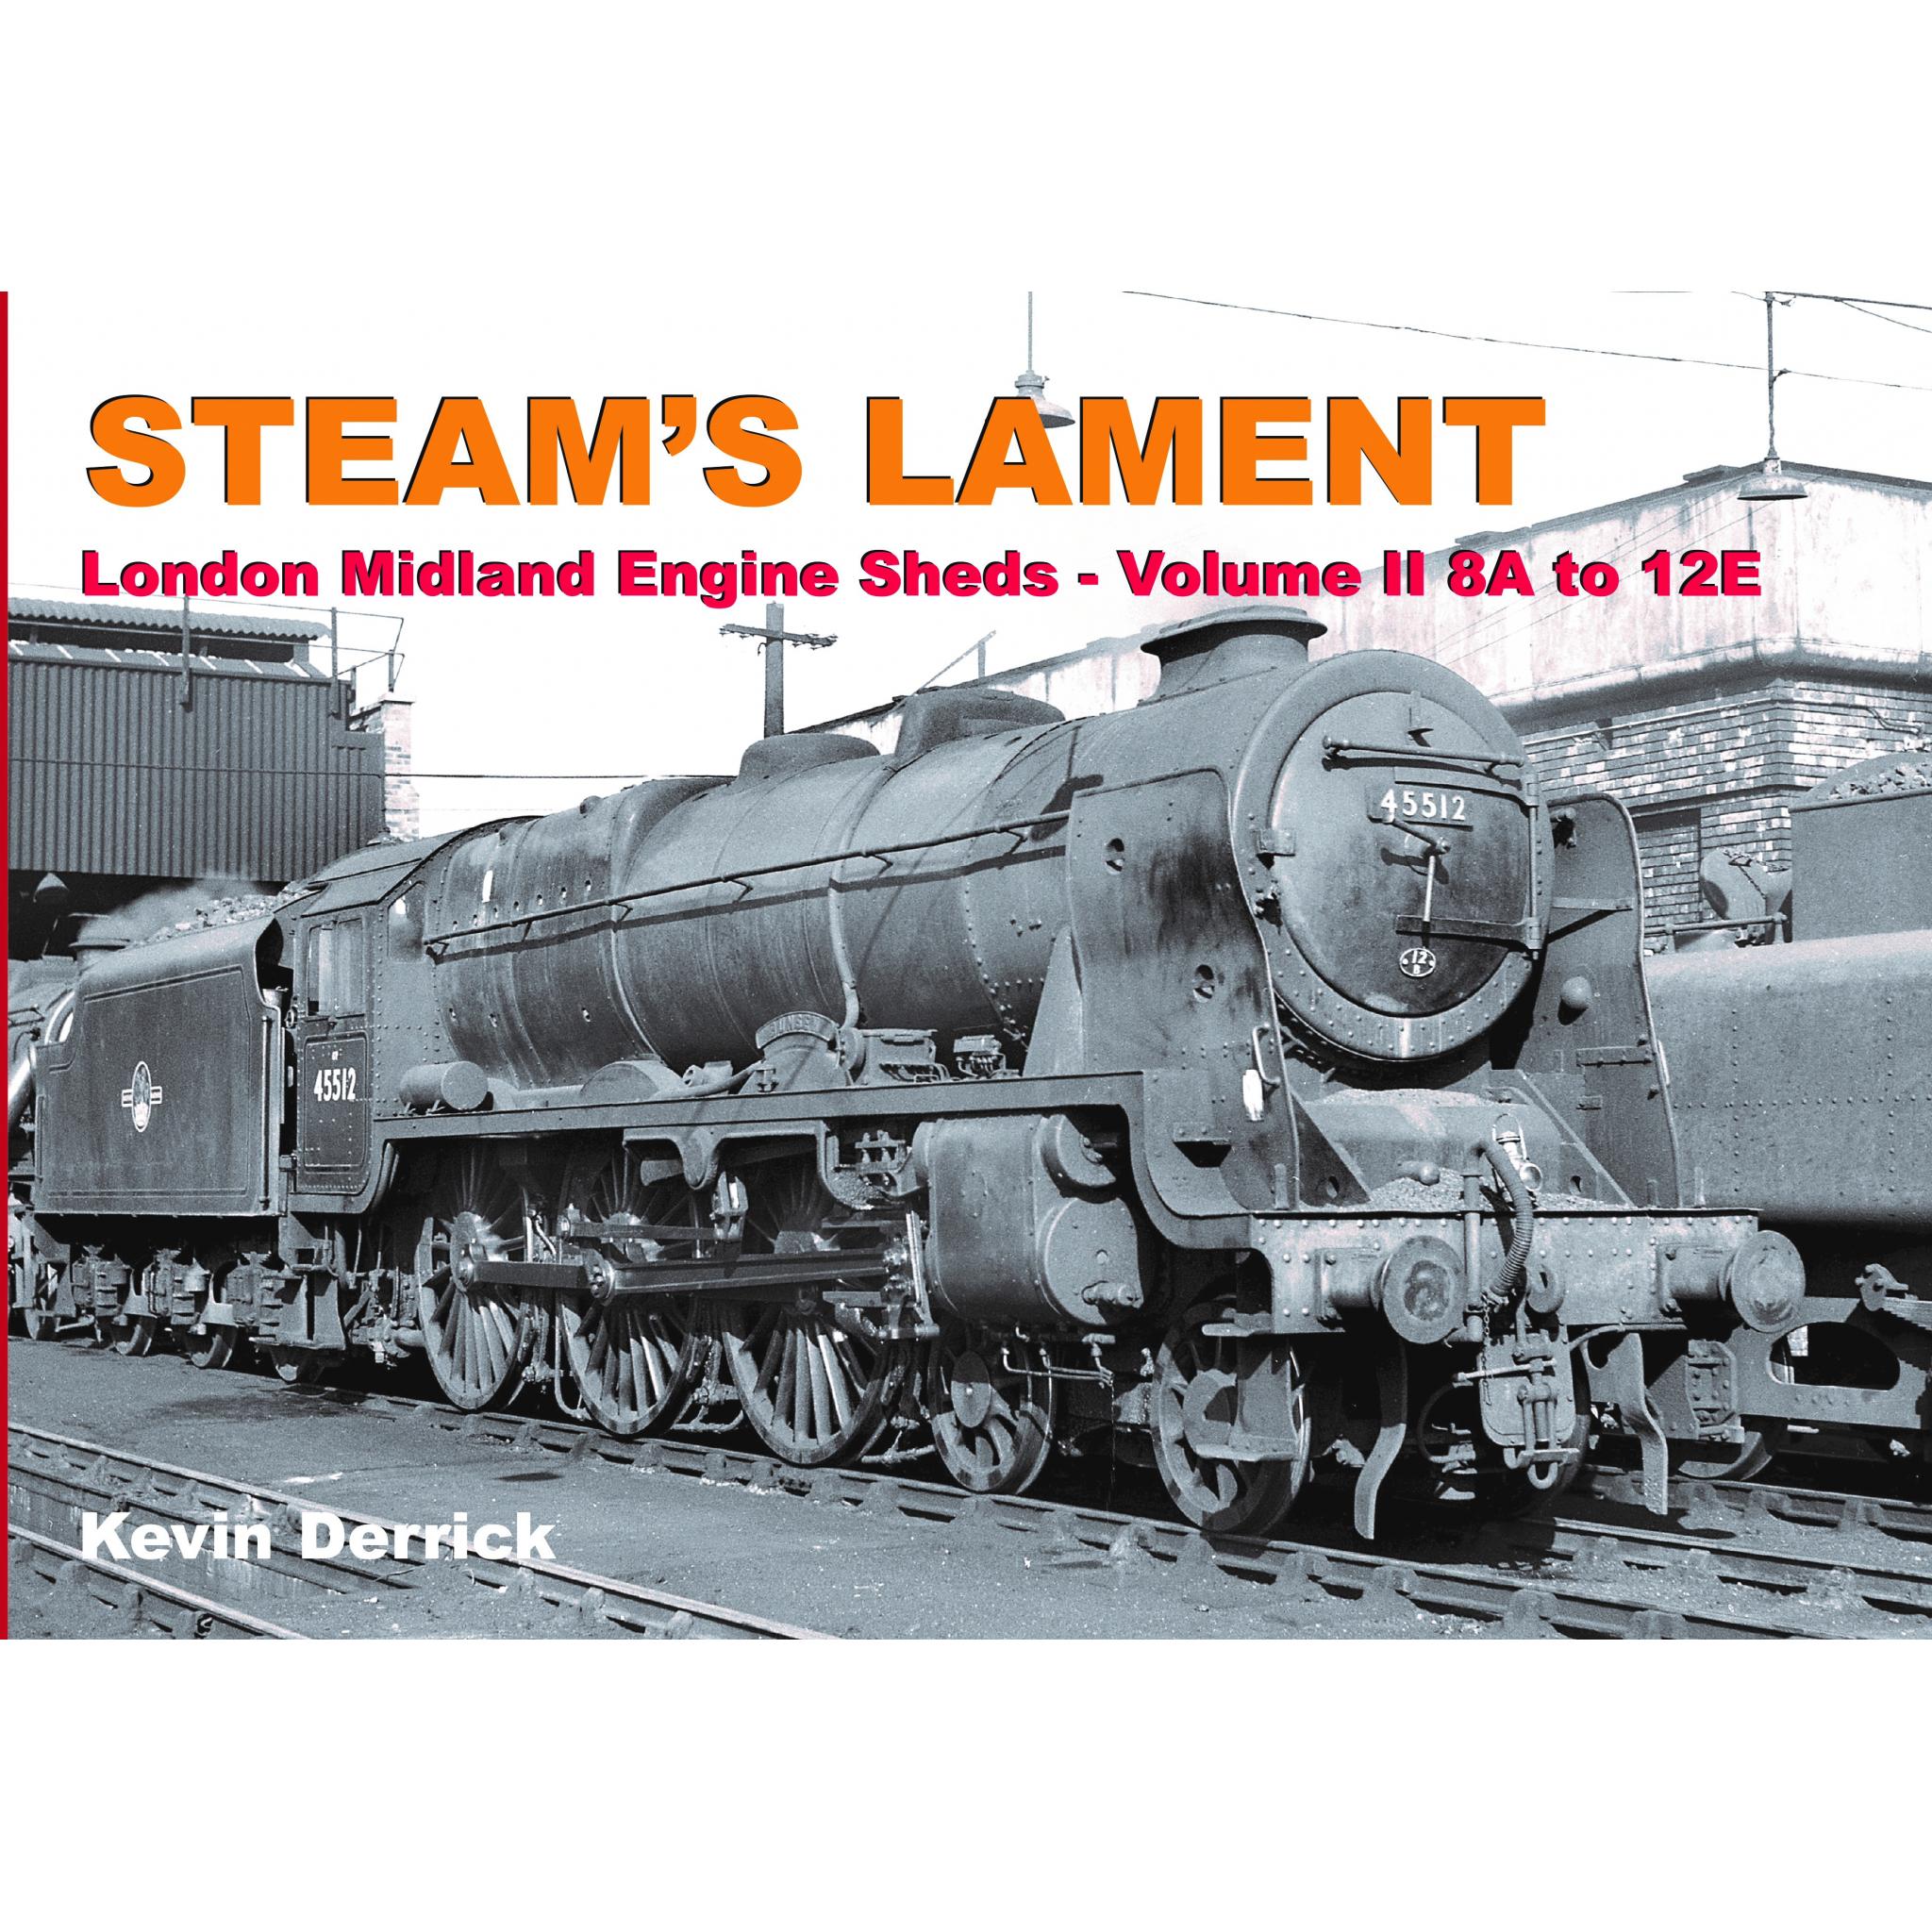 STEAM'S LAMENT London Midland Region Engine Sheds II 8A to 12E ALMOST SOLD OUT